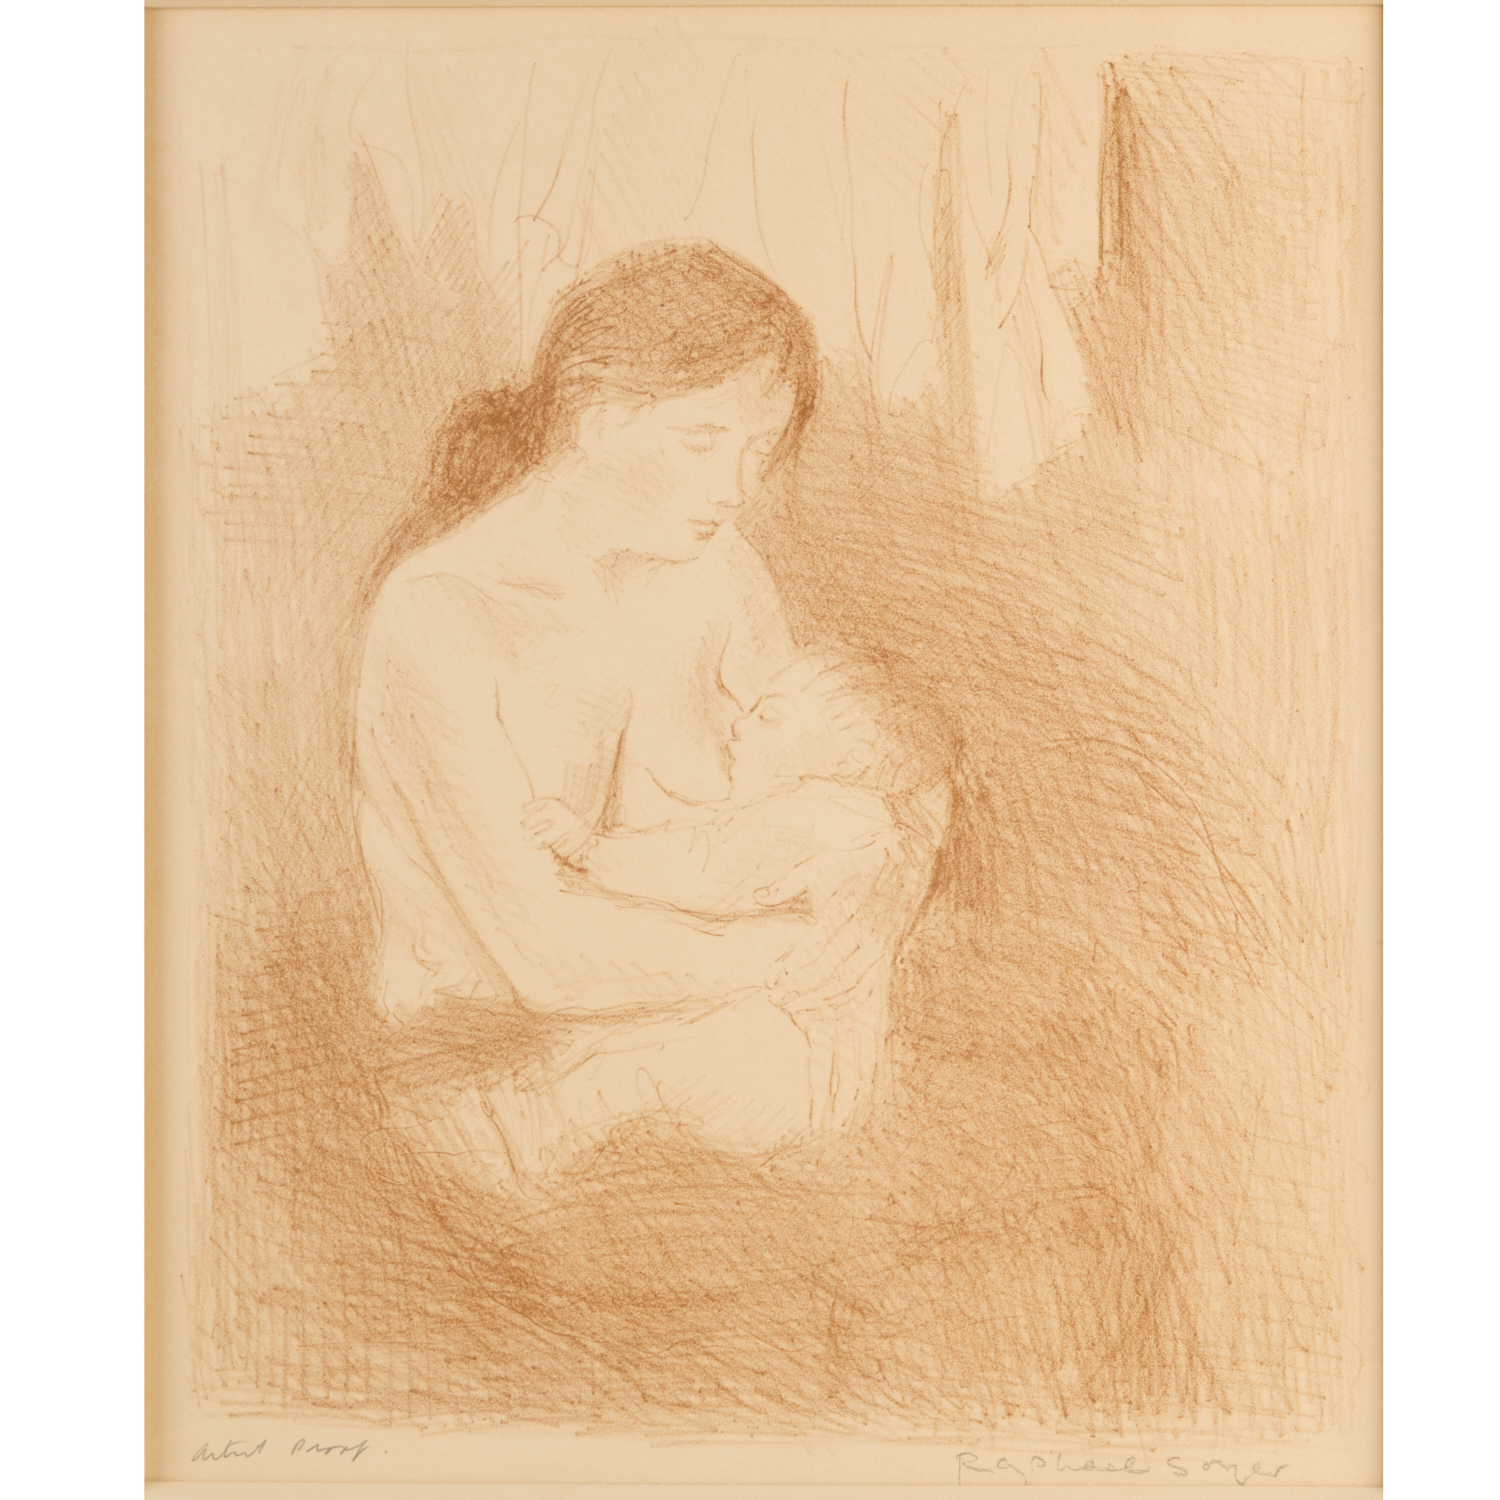 RAPHAEL SOYER LITHOGRAPH SIGNED 361061